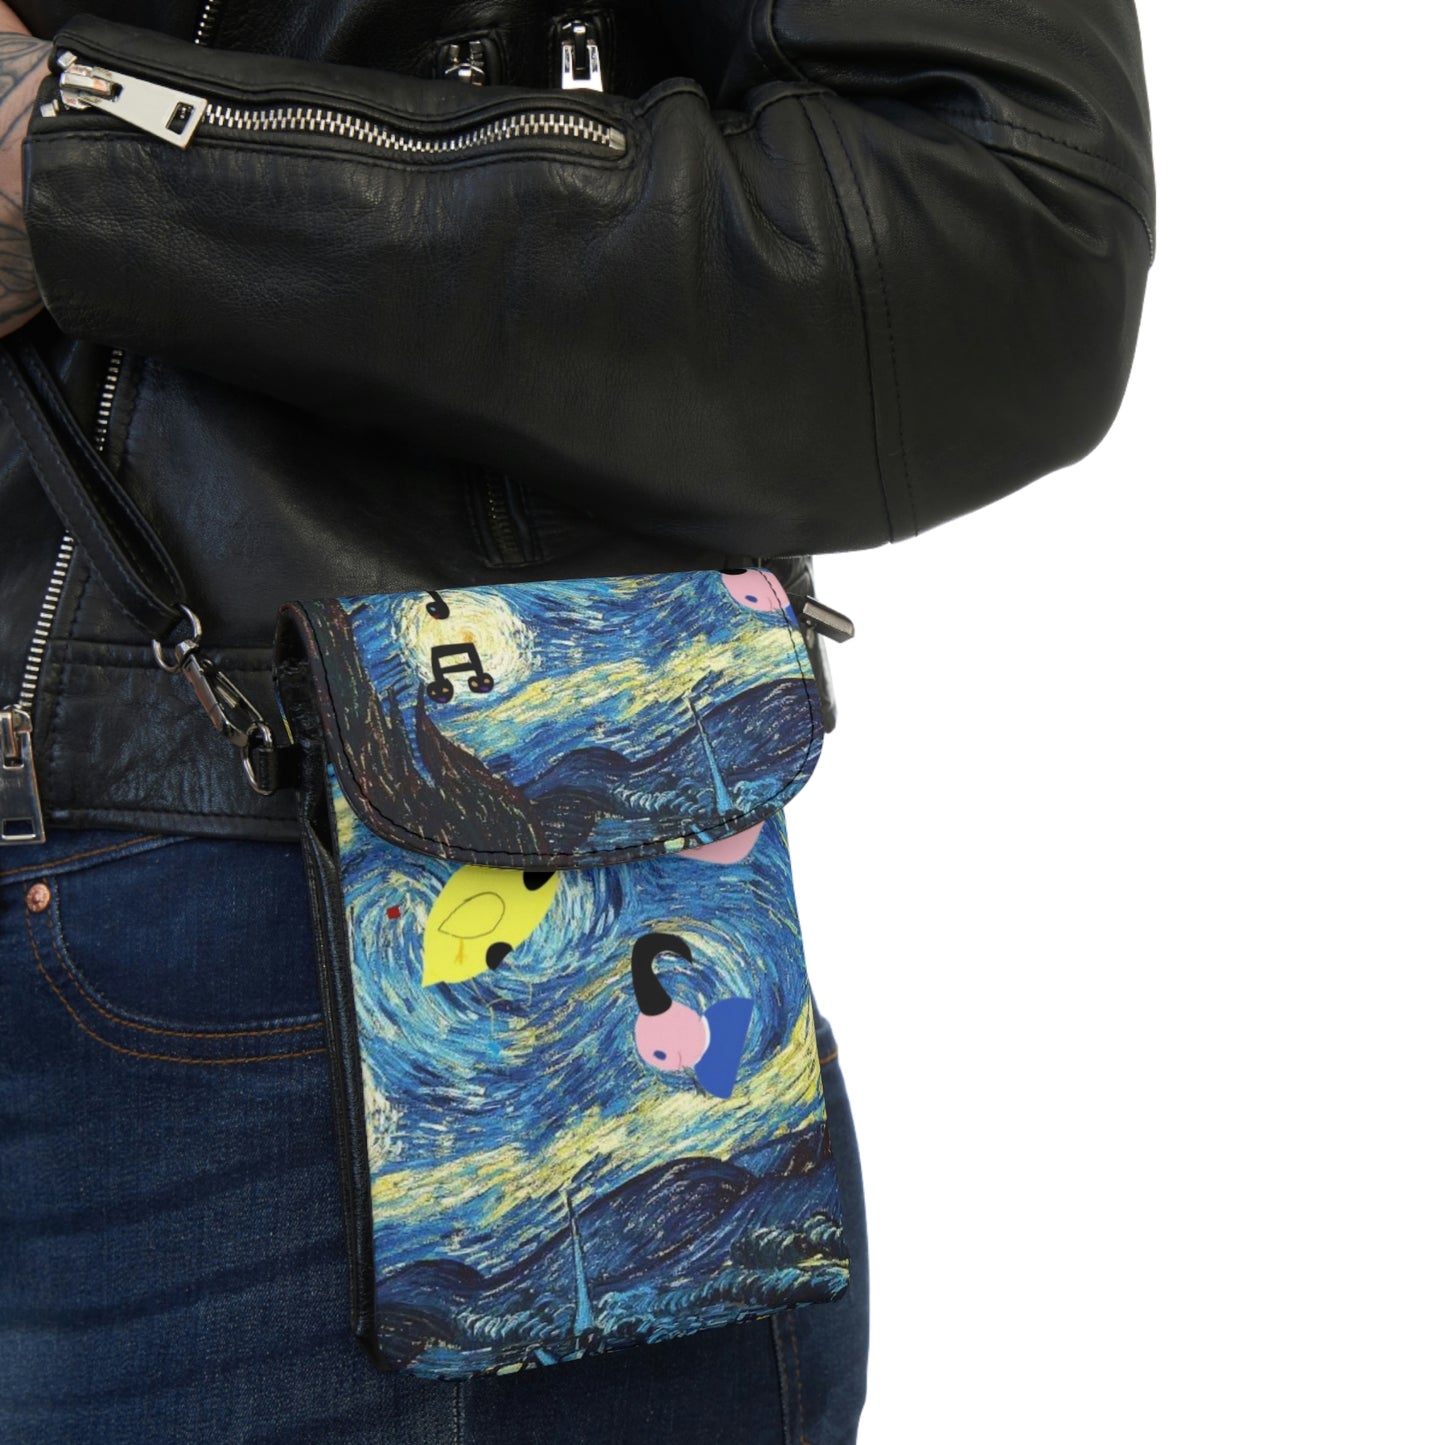 Small Cell Phone Wallet/Handbag in Vegan Leather with Oddly Starry Night by DB print